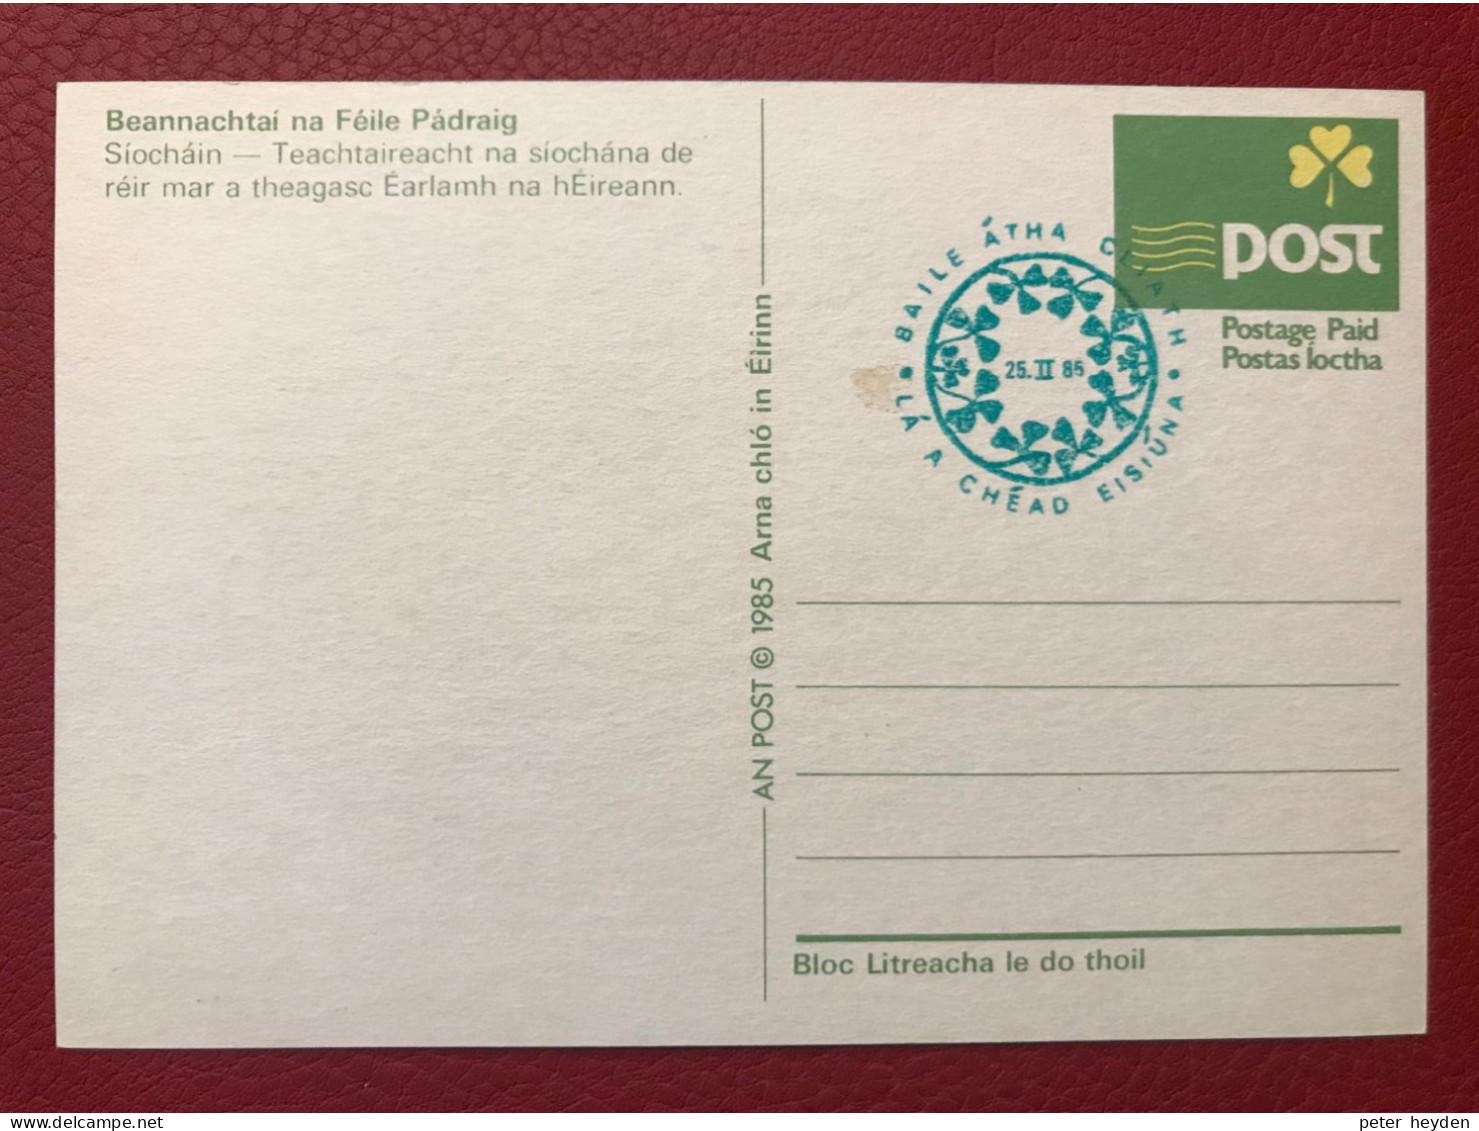 IRELAND 1985 Saint Patrick Day 6 Cards Green FDC Cancel ~ MacDonnell Whyte SPS2 - PSPC20/25 - Postal Stationery